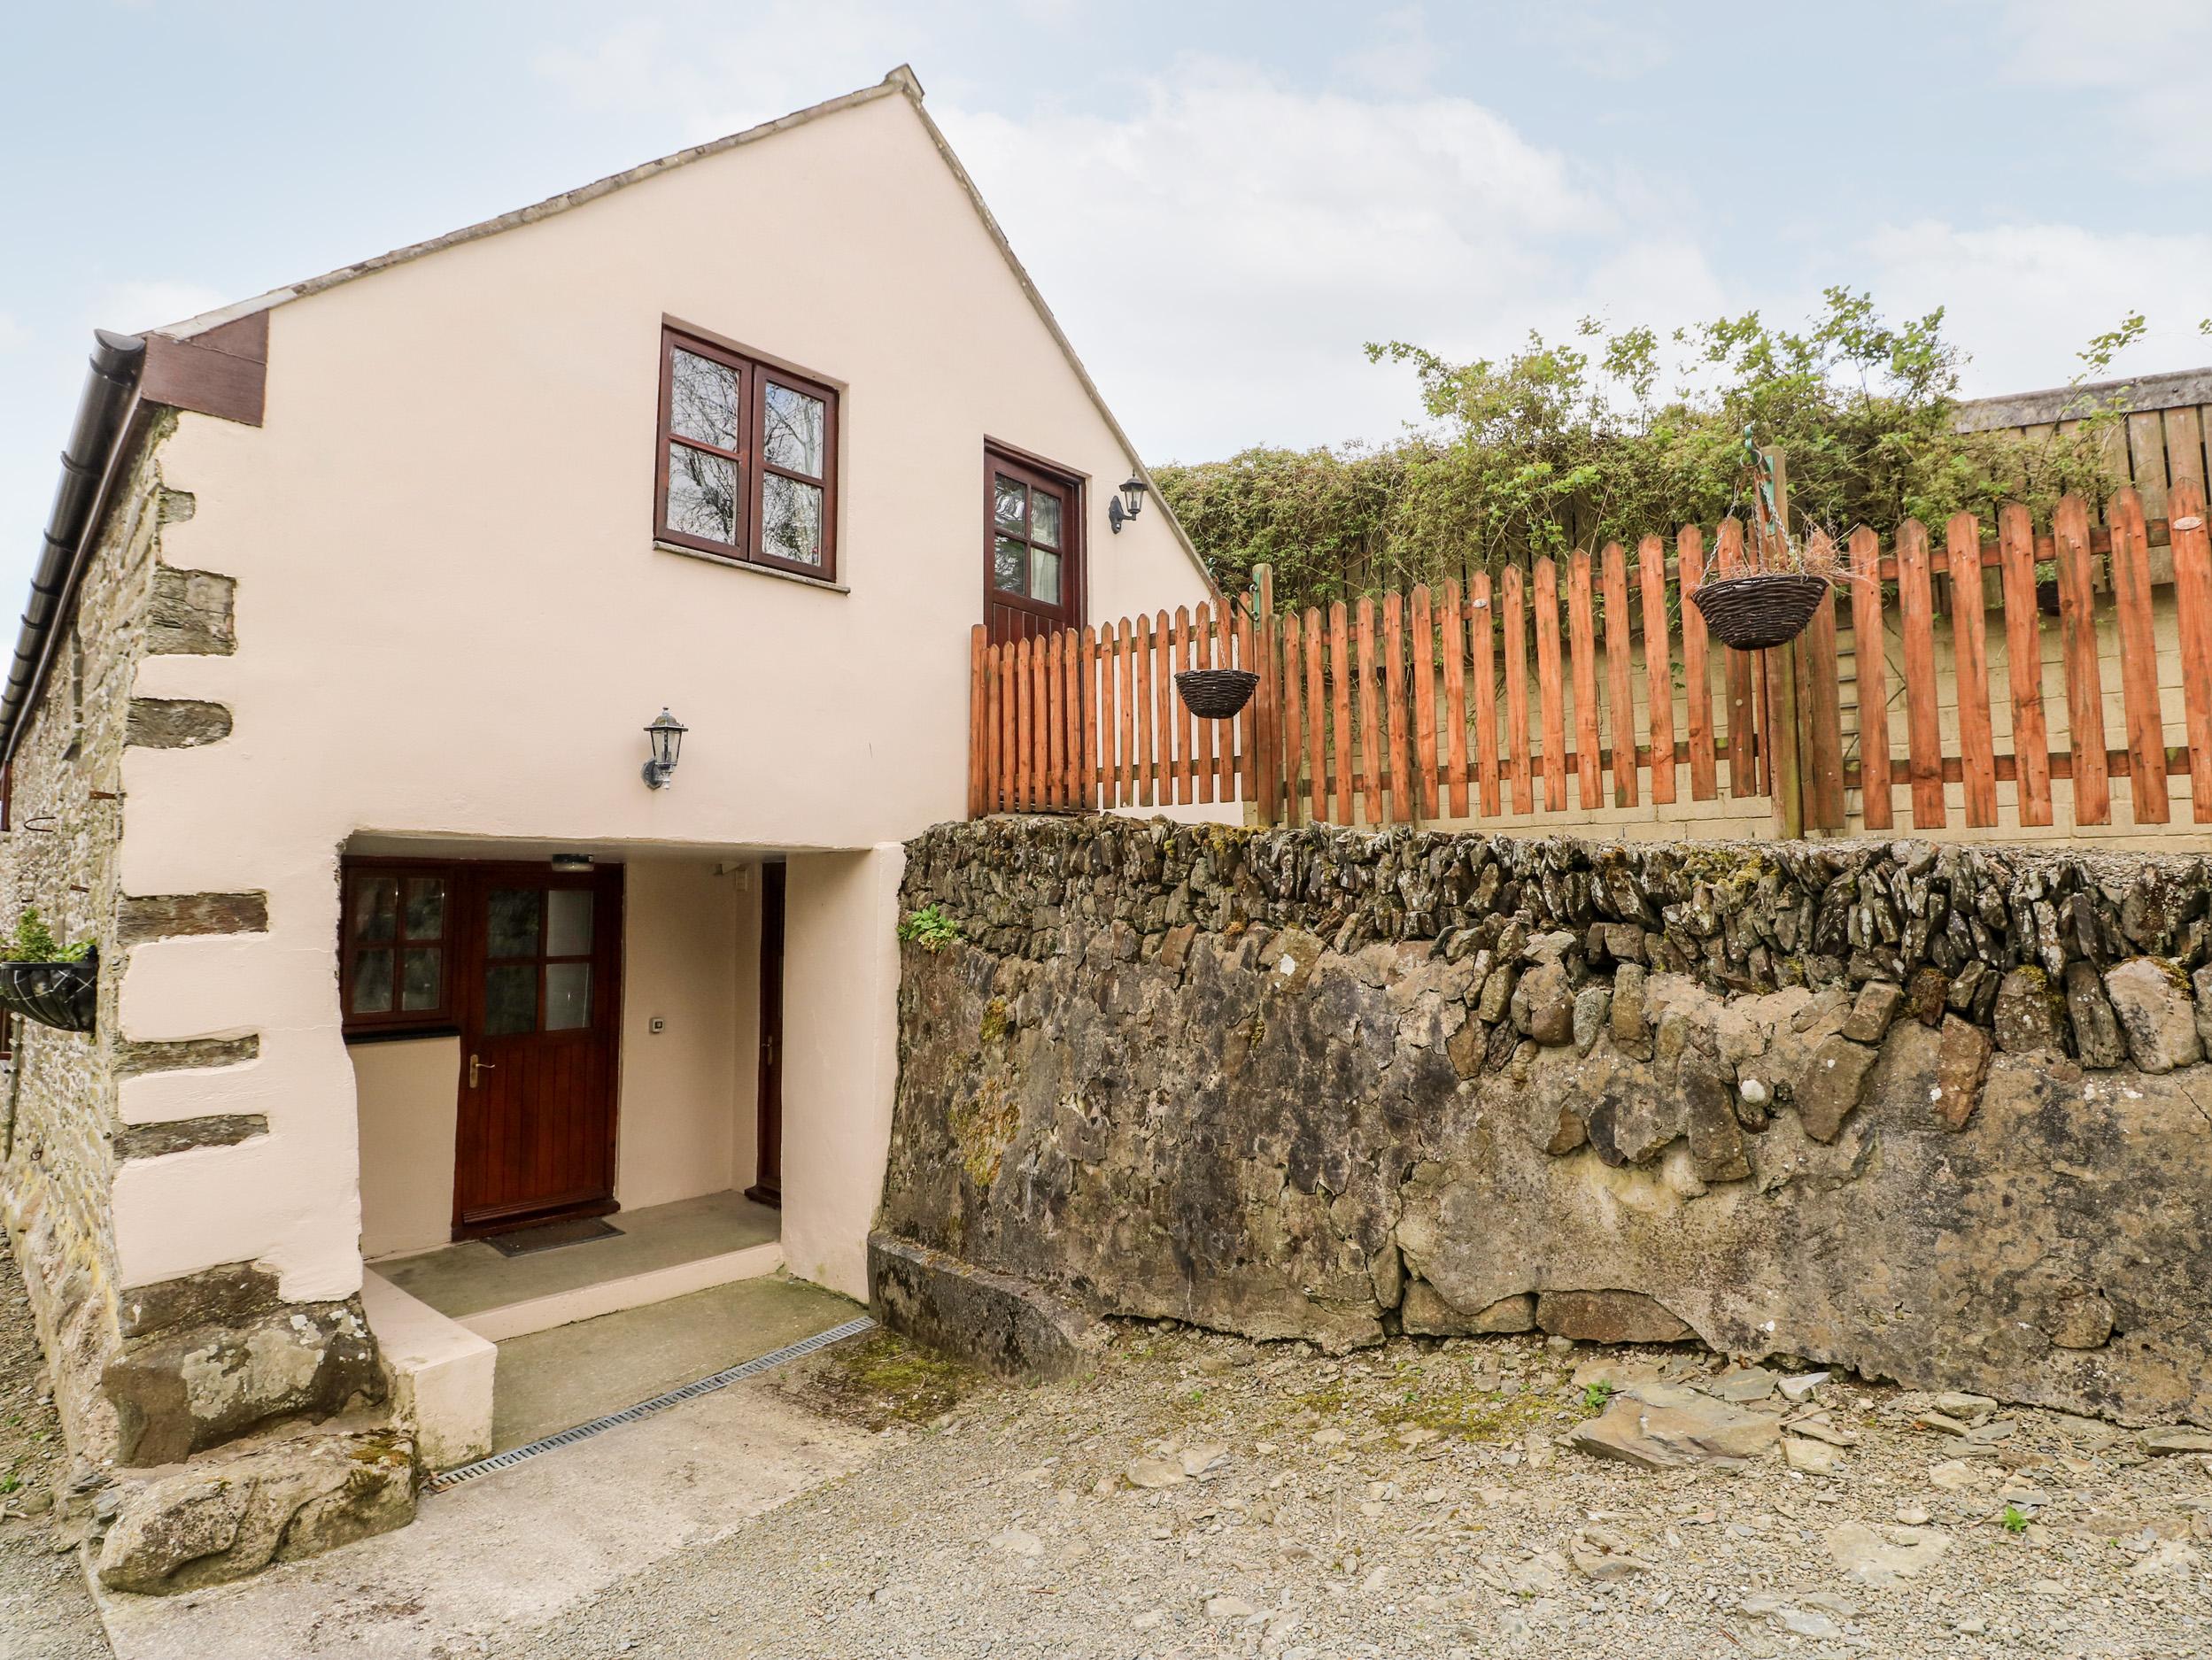 Holiday Cottage Reviews for The Cottage - Self Catering Property in Llandysul, Ceredigion